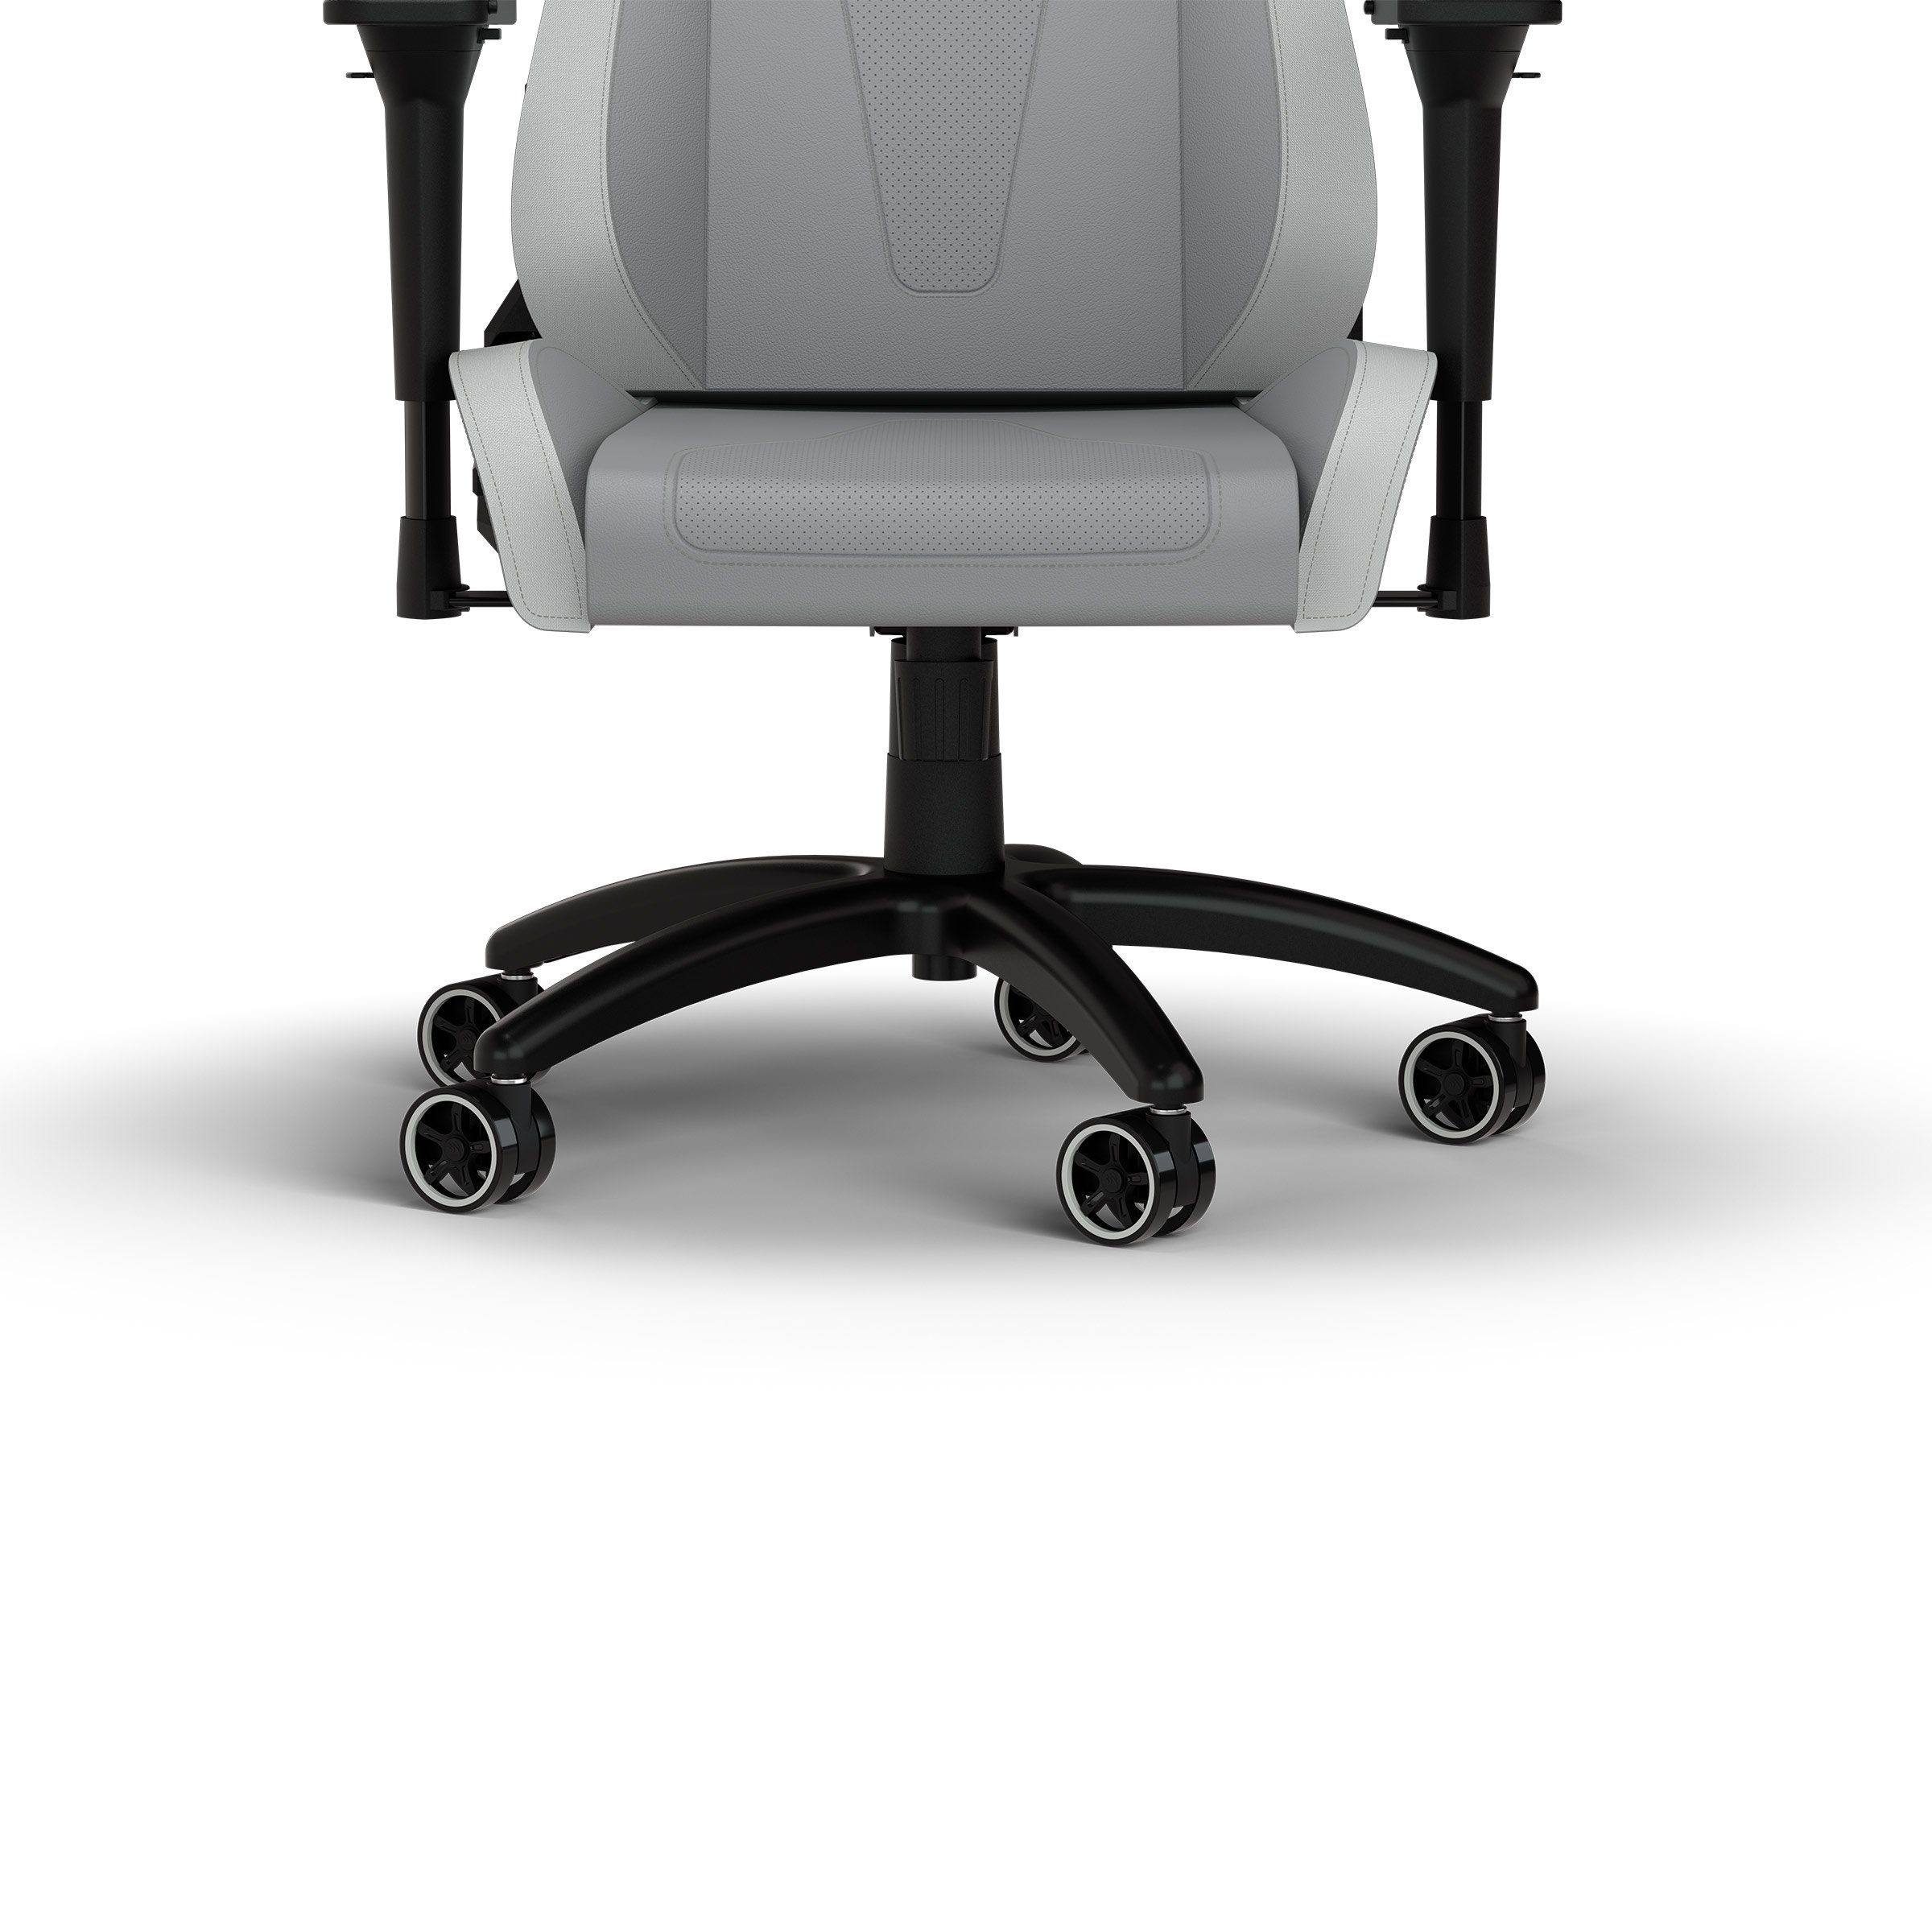 Gaming-Stuhl Fit, Standard Corsair Light Grey/White TC200 Chair, Gaming Leatherette